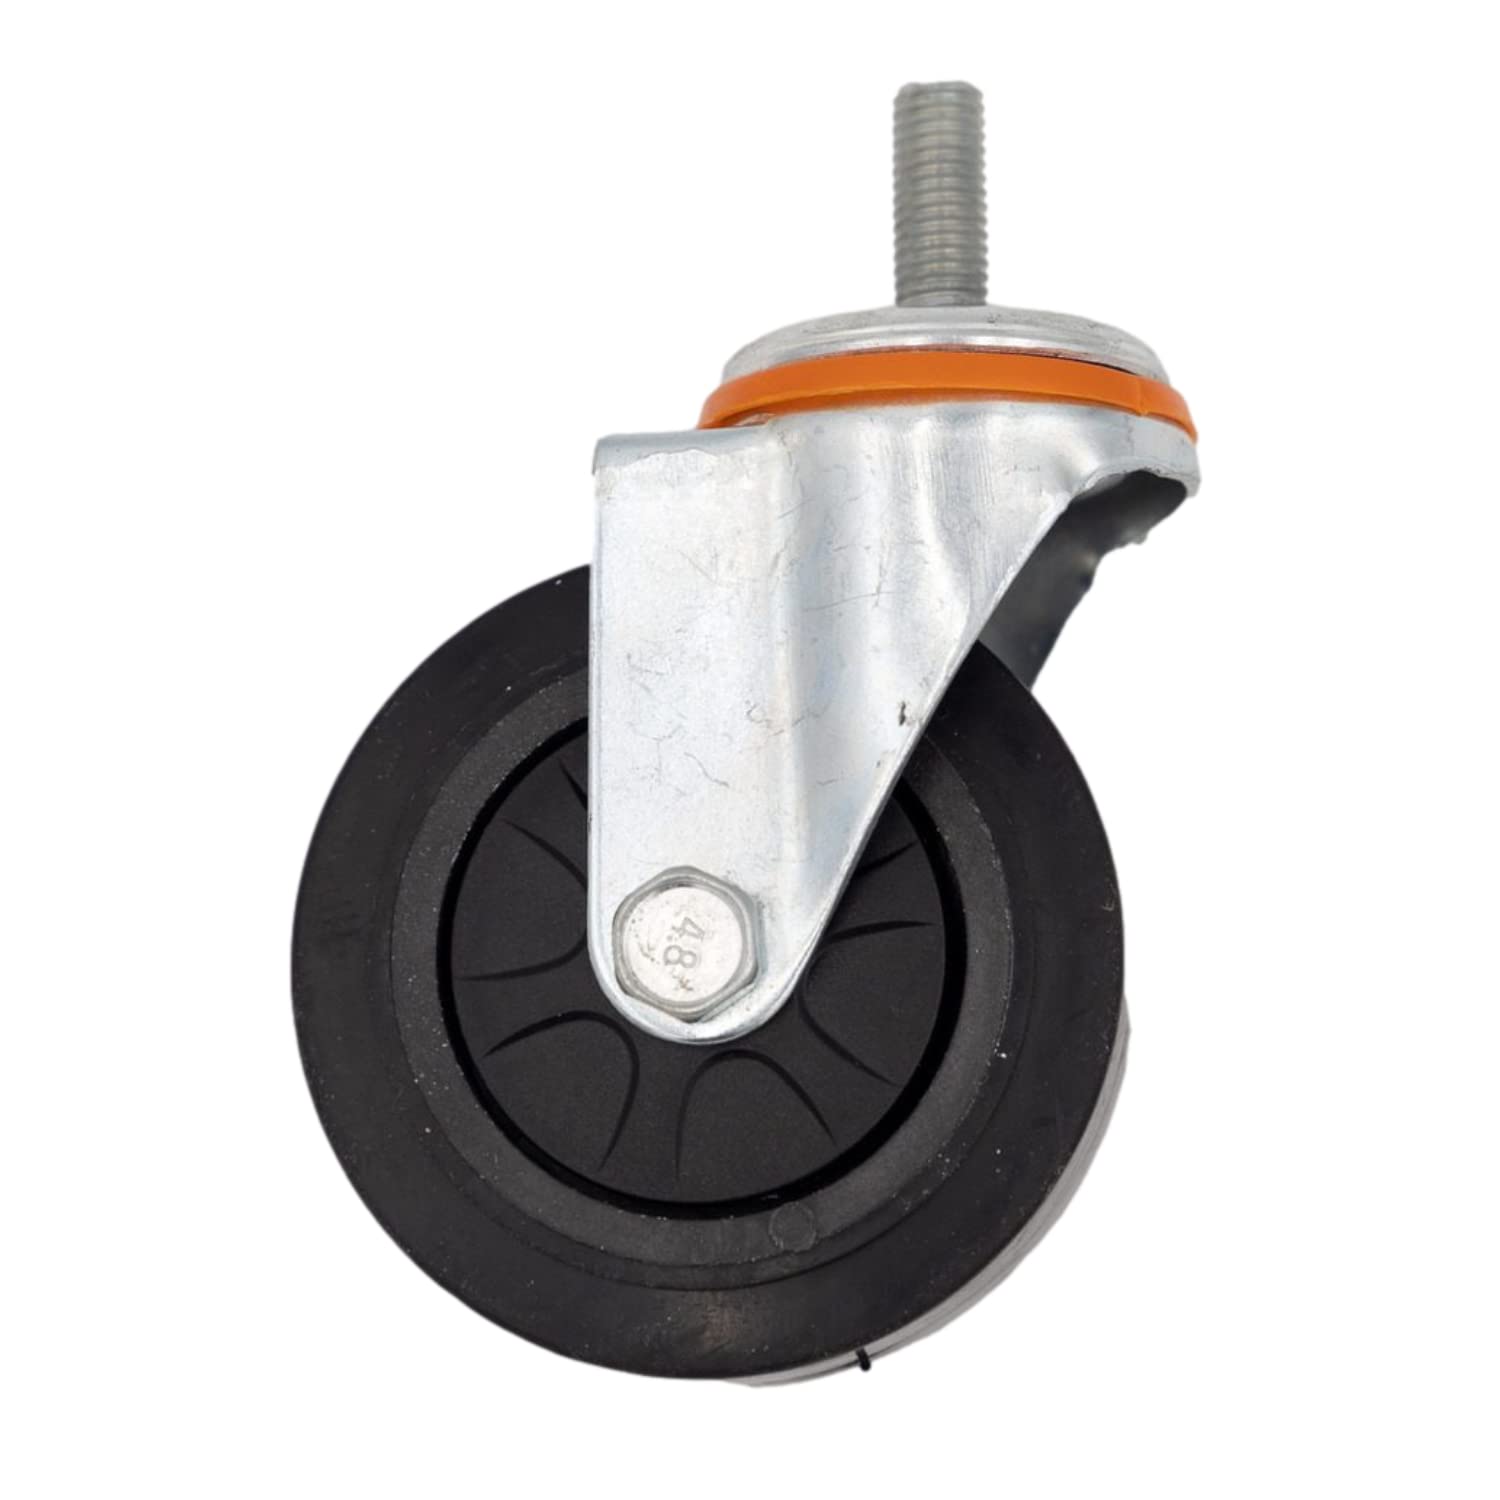 PU wheel for hoverkart with metal swivel caster, featuring an orange tension ring 